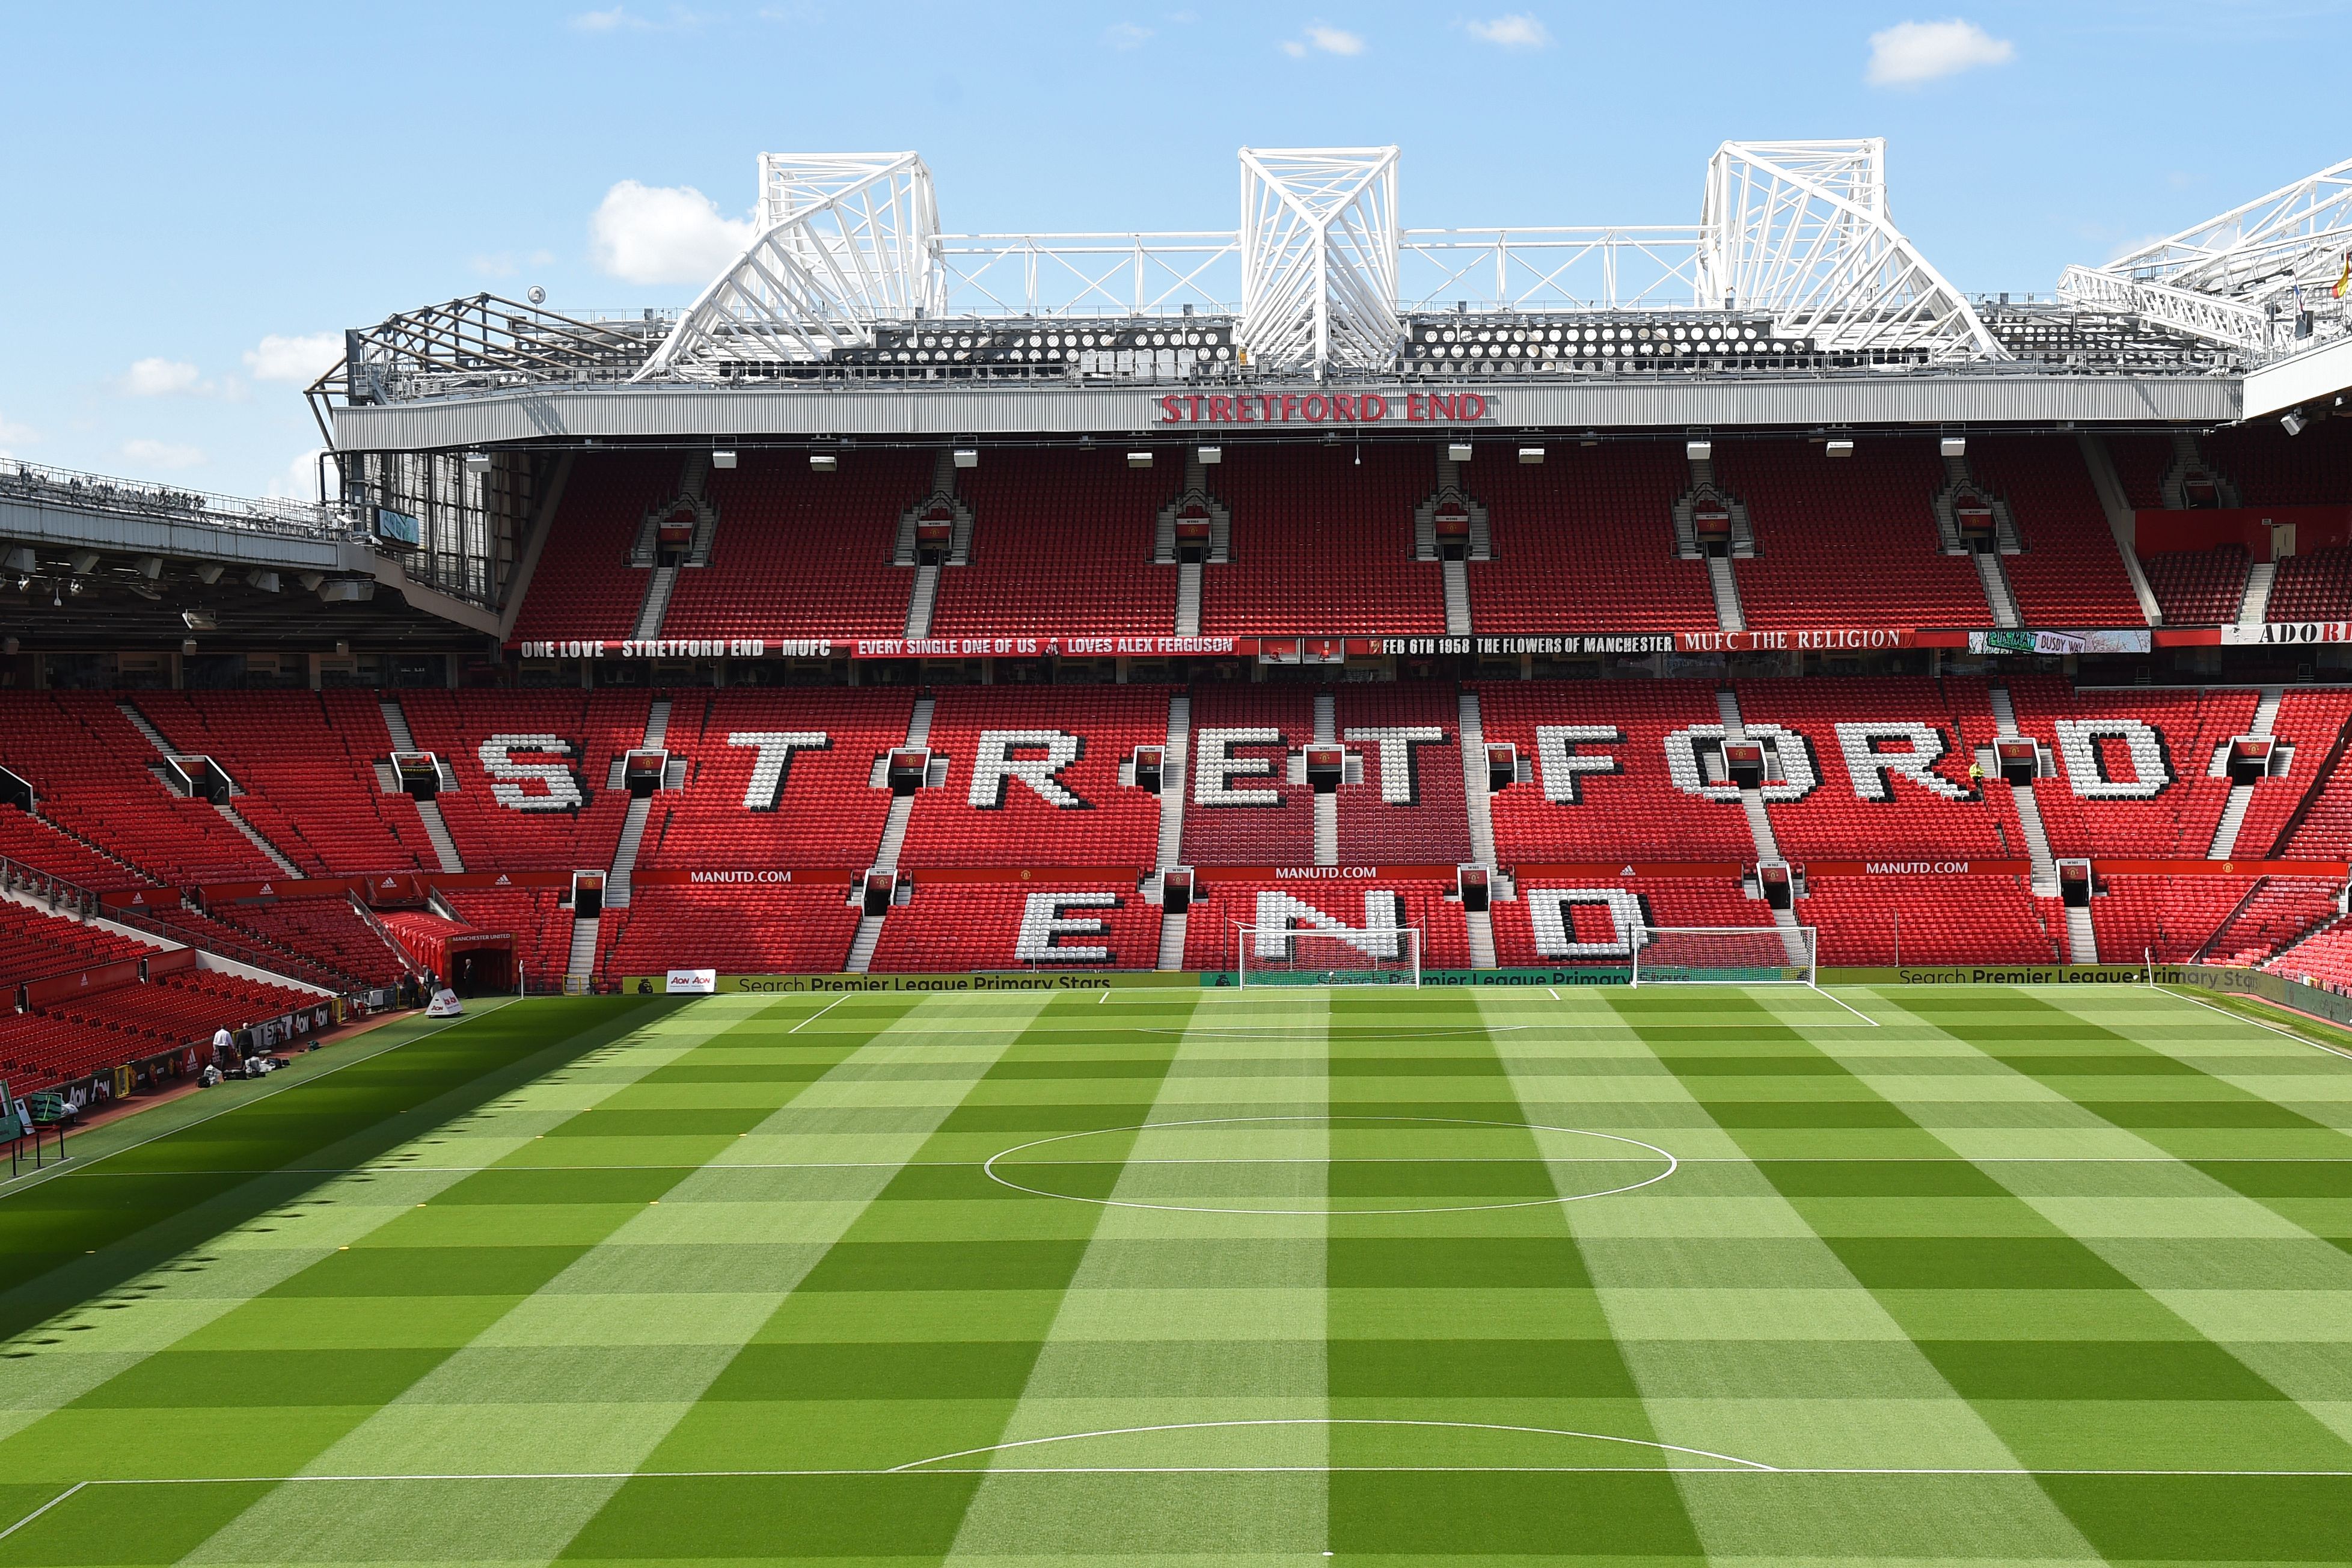 The Stretford End is pictured in the empty stadium on the last day of the football season ahead of the English Premier League football match between Manchester United and Watford at Old Trafford in Manchester, north west England, on May 13, 2018. (Photo by Oli SCARFF / AFP) / RESTRICTED TO EDITORIAL USE. No use with unauthorized audio, video, data, fixture lists, club/league logos or 'live' services. Online in-match use limited to 75 images, no video emulation. No use in betting, games or single club/league/player publications. /         (Photo credit should read OLI SCARFF/AFP/Getty Images)